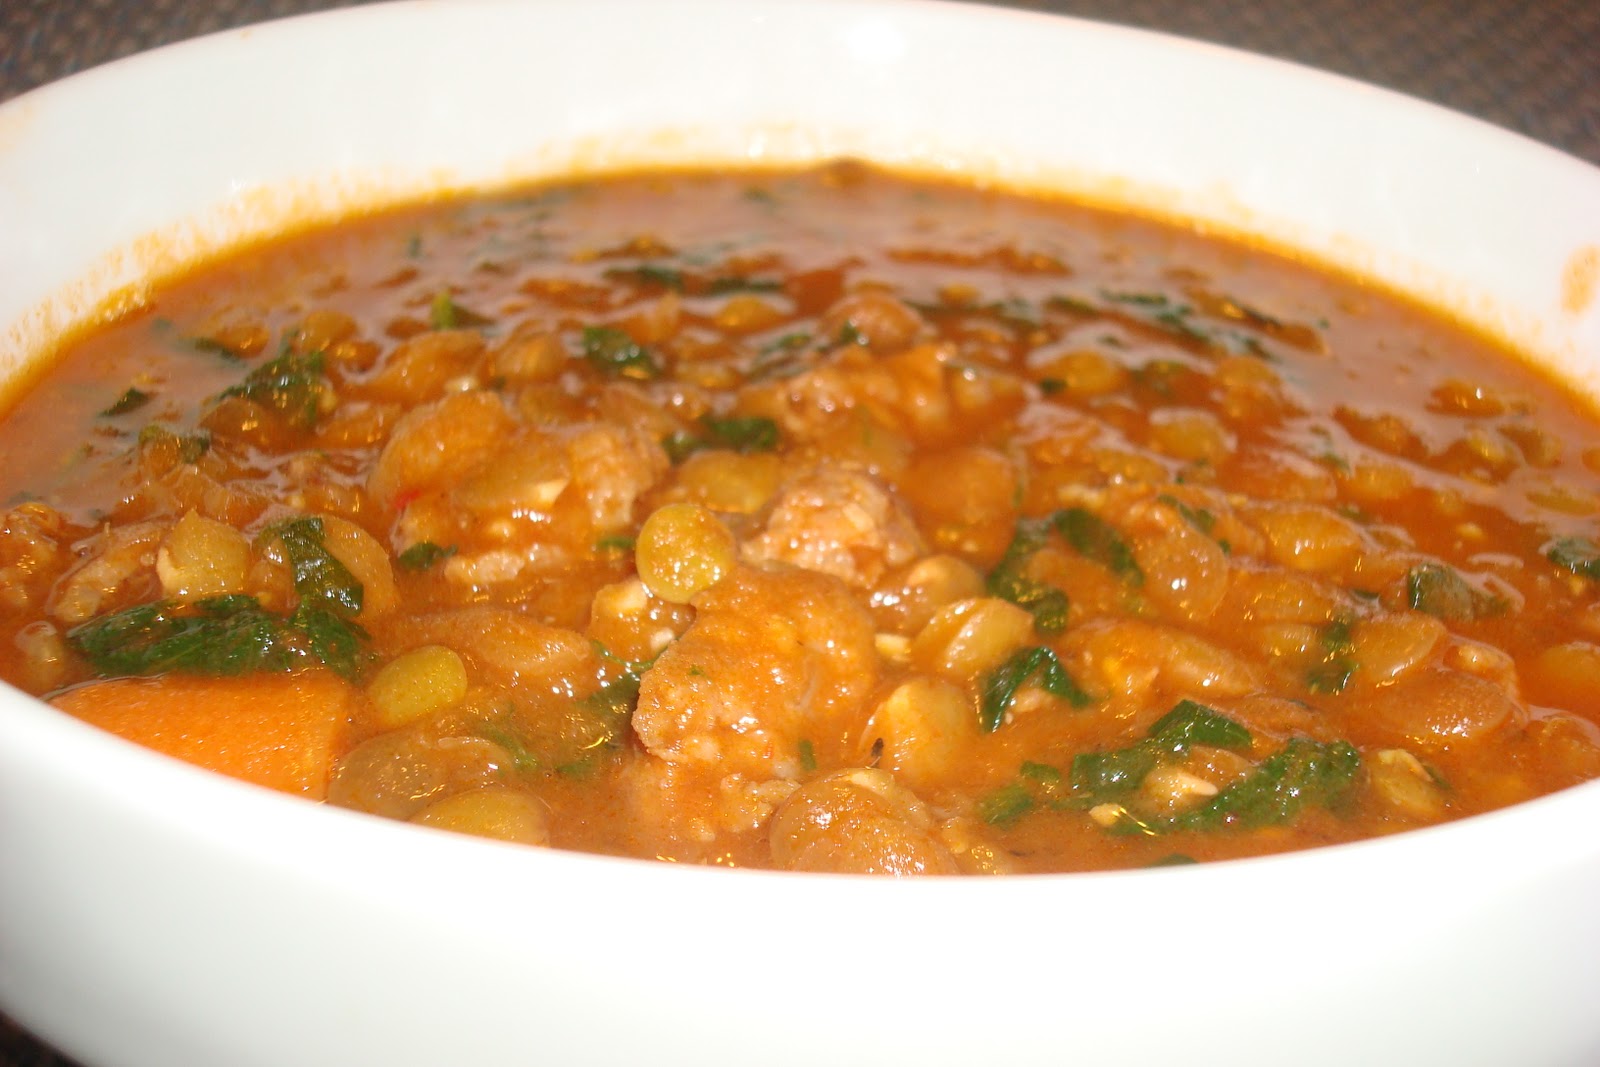 Basil & Butter: Adventures in the Delectable: Spicy Lentil and Sausage Soup